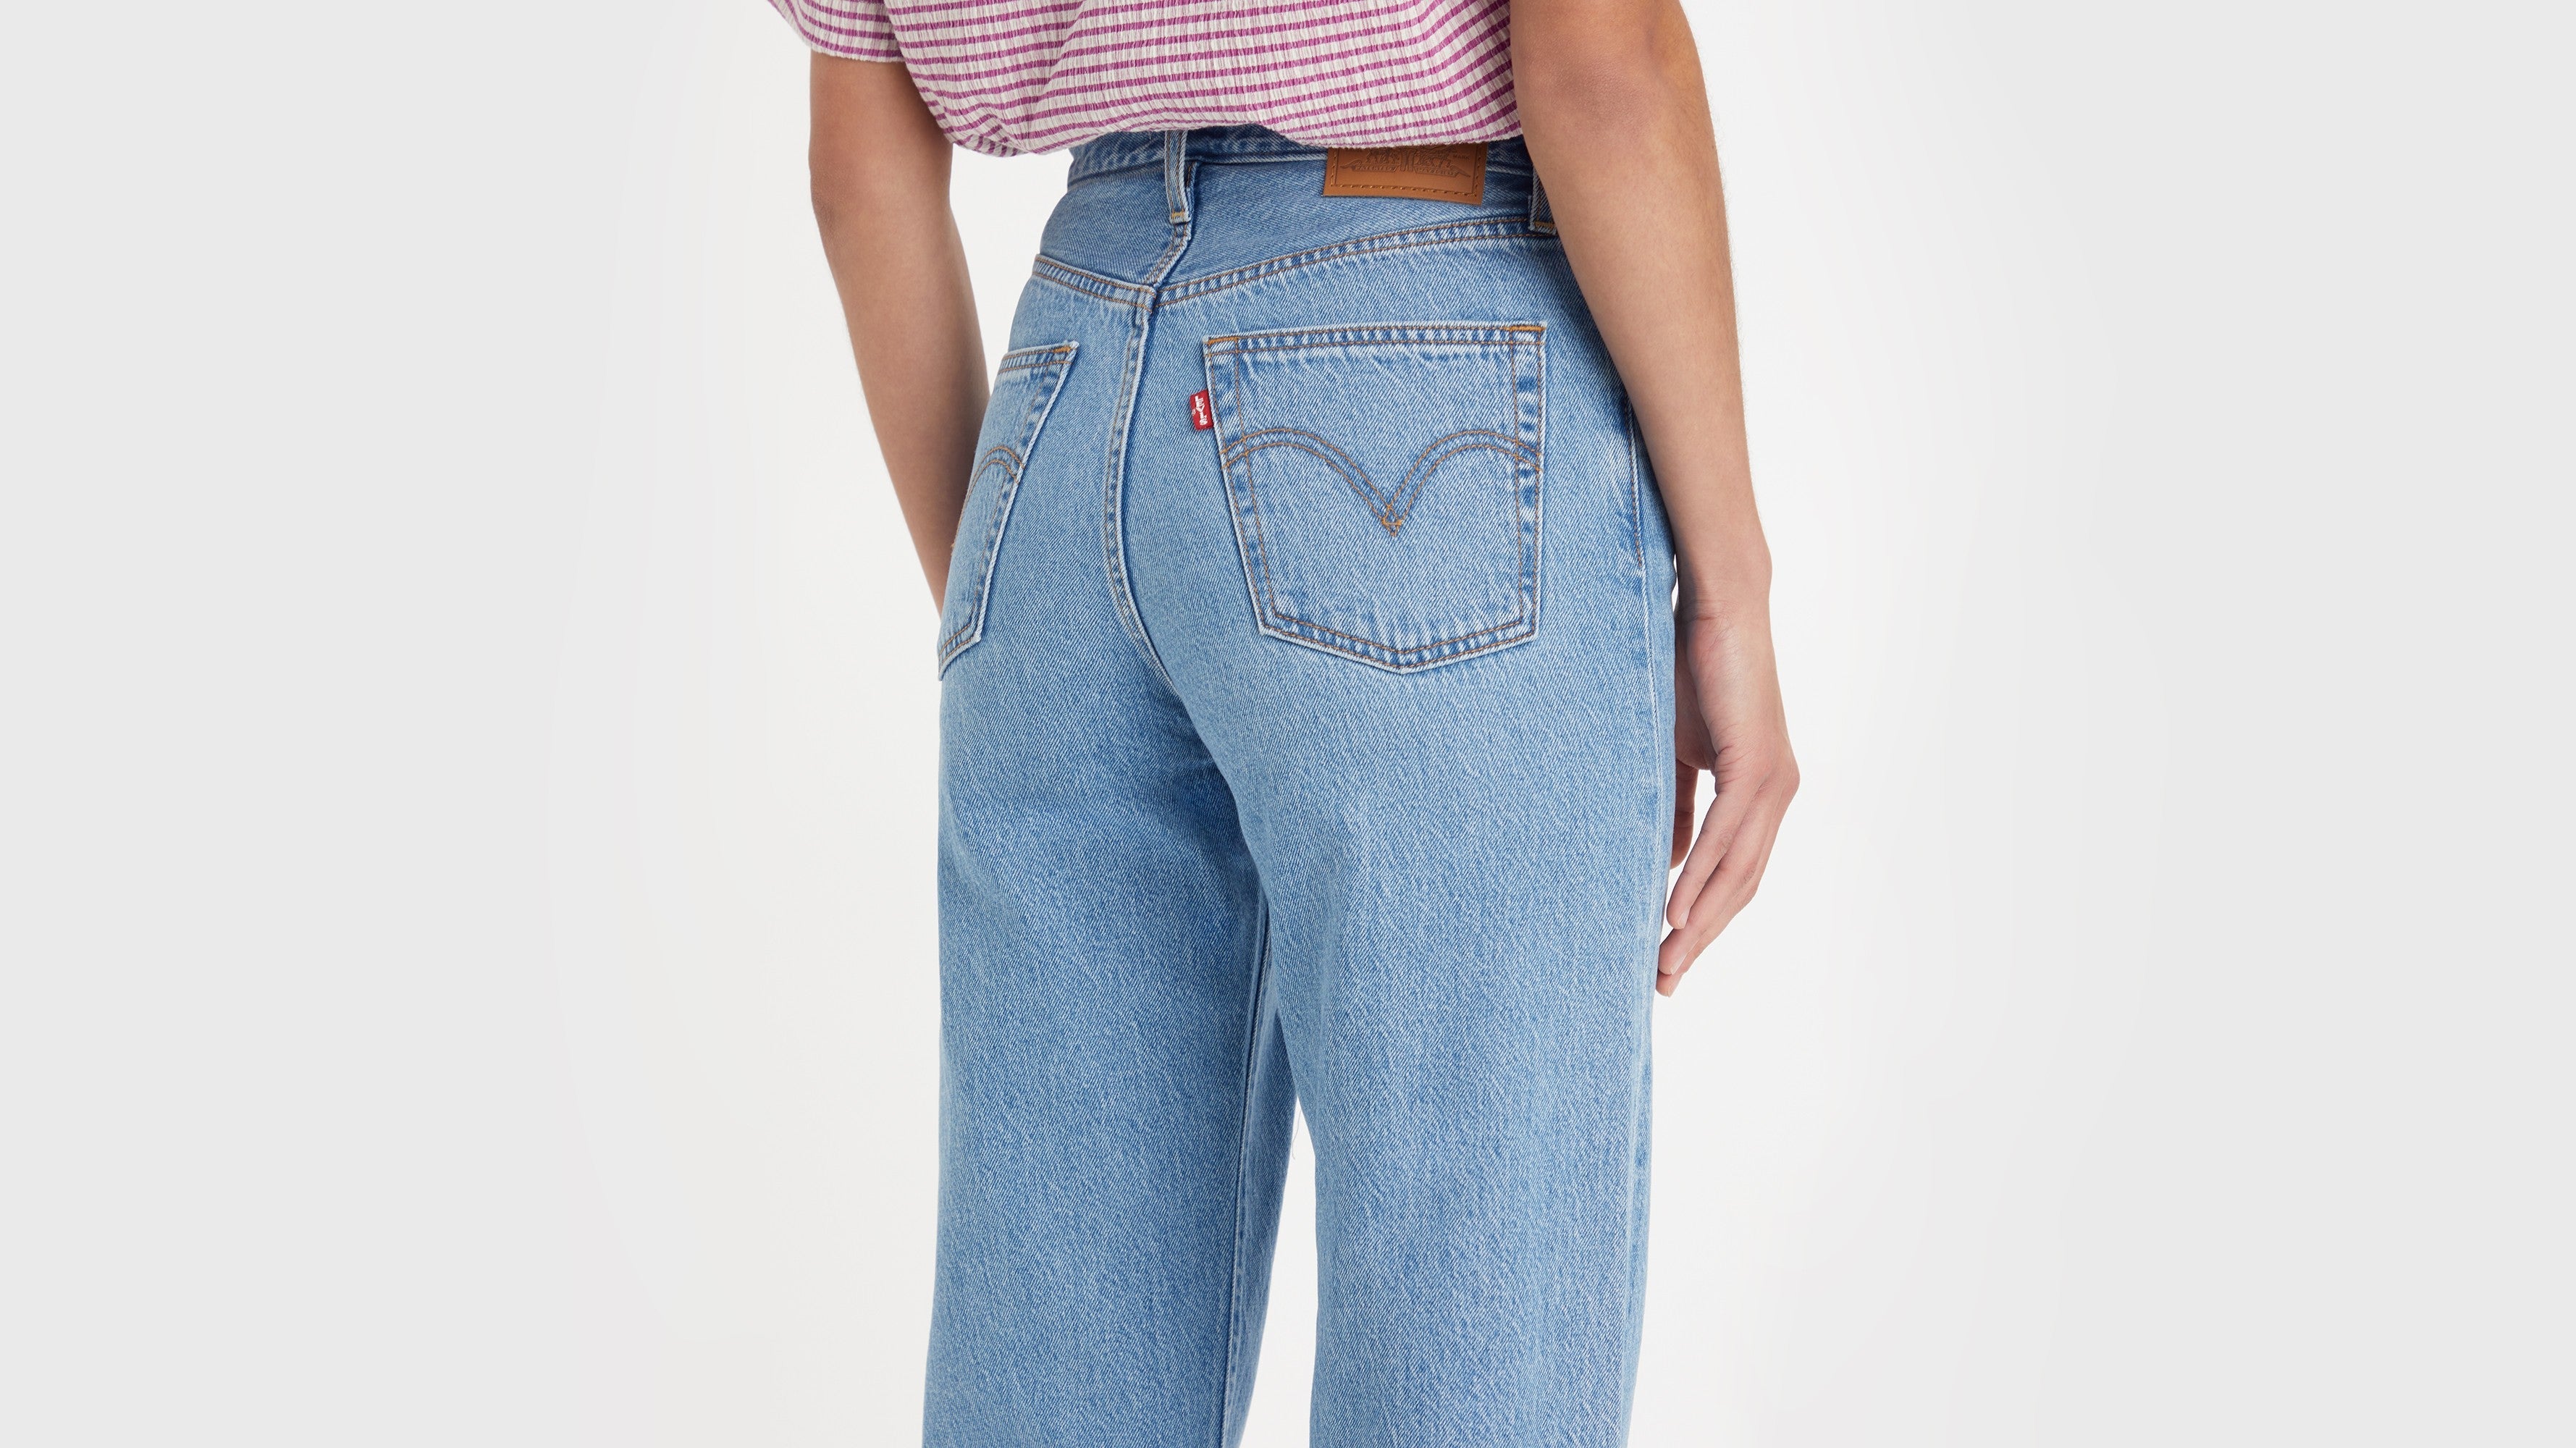 High-Waisted Cloud 94 Soft Ankle Jogger Pants